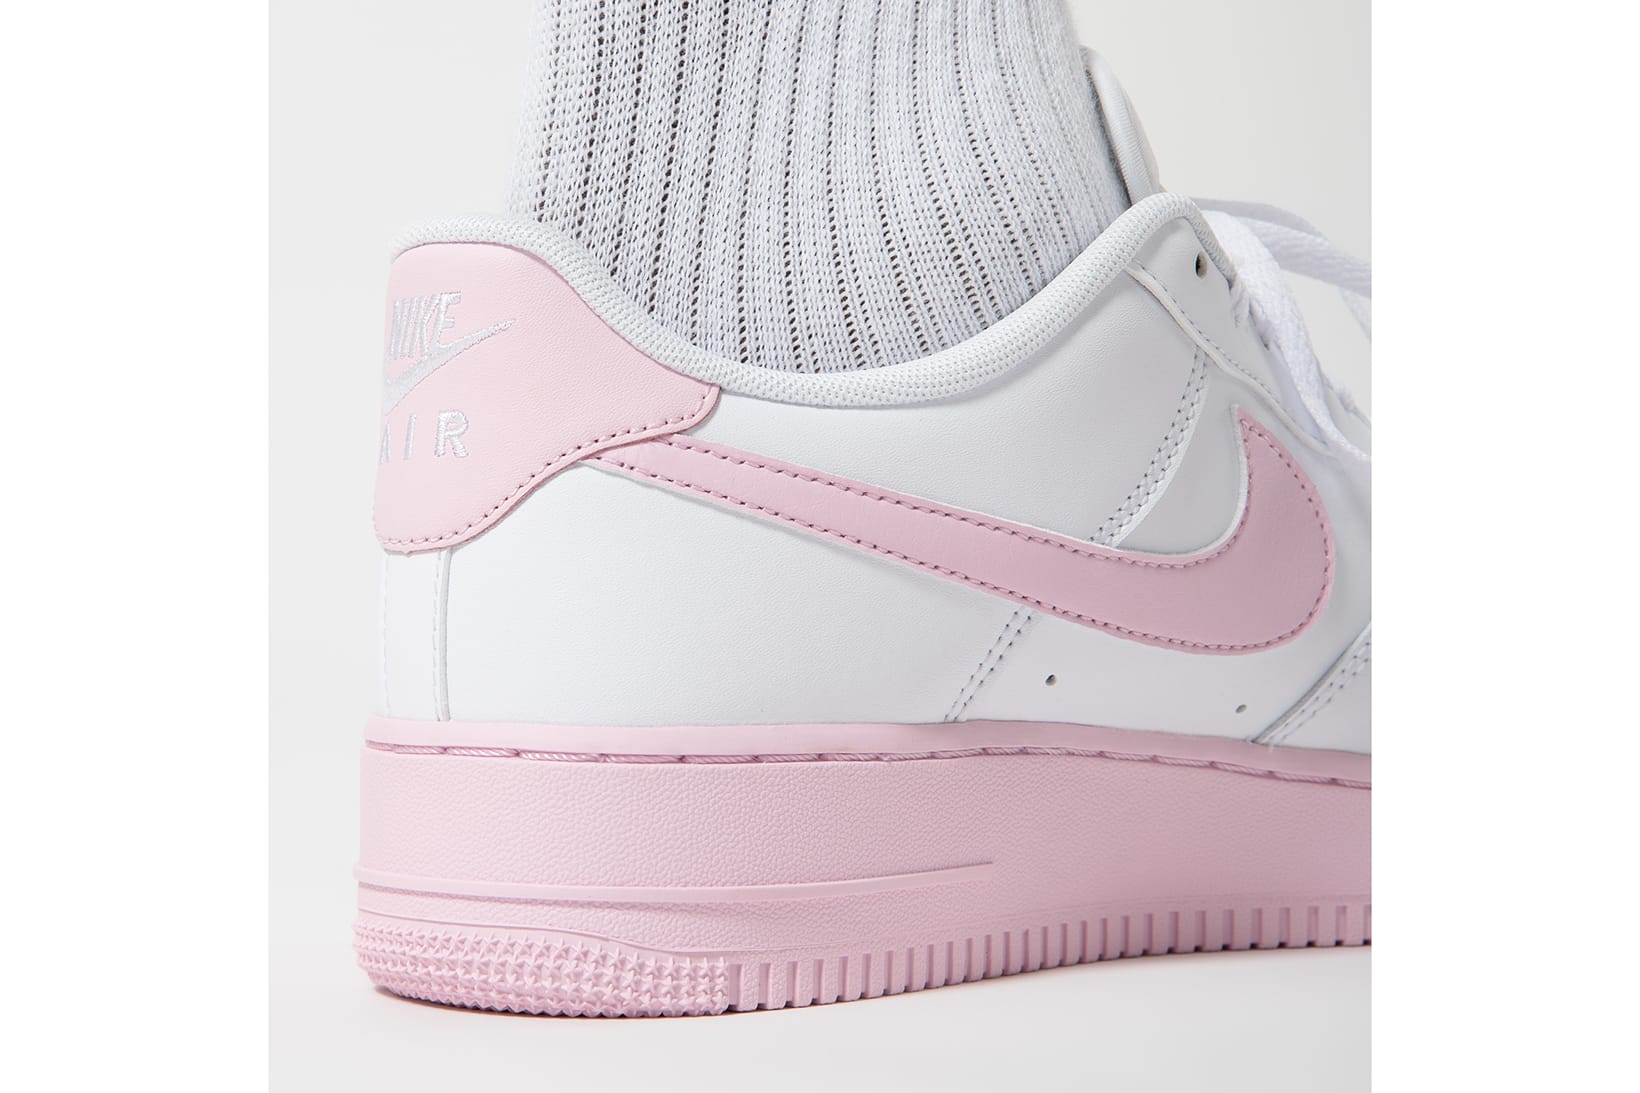 Nike Air Force 1 '07 Sneakers Pink/White Release | HYPEBAE